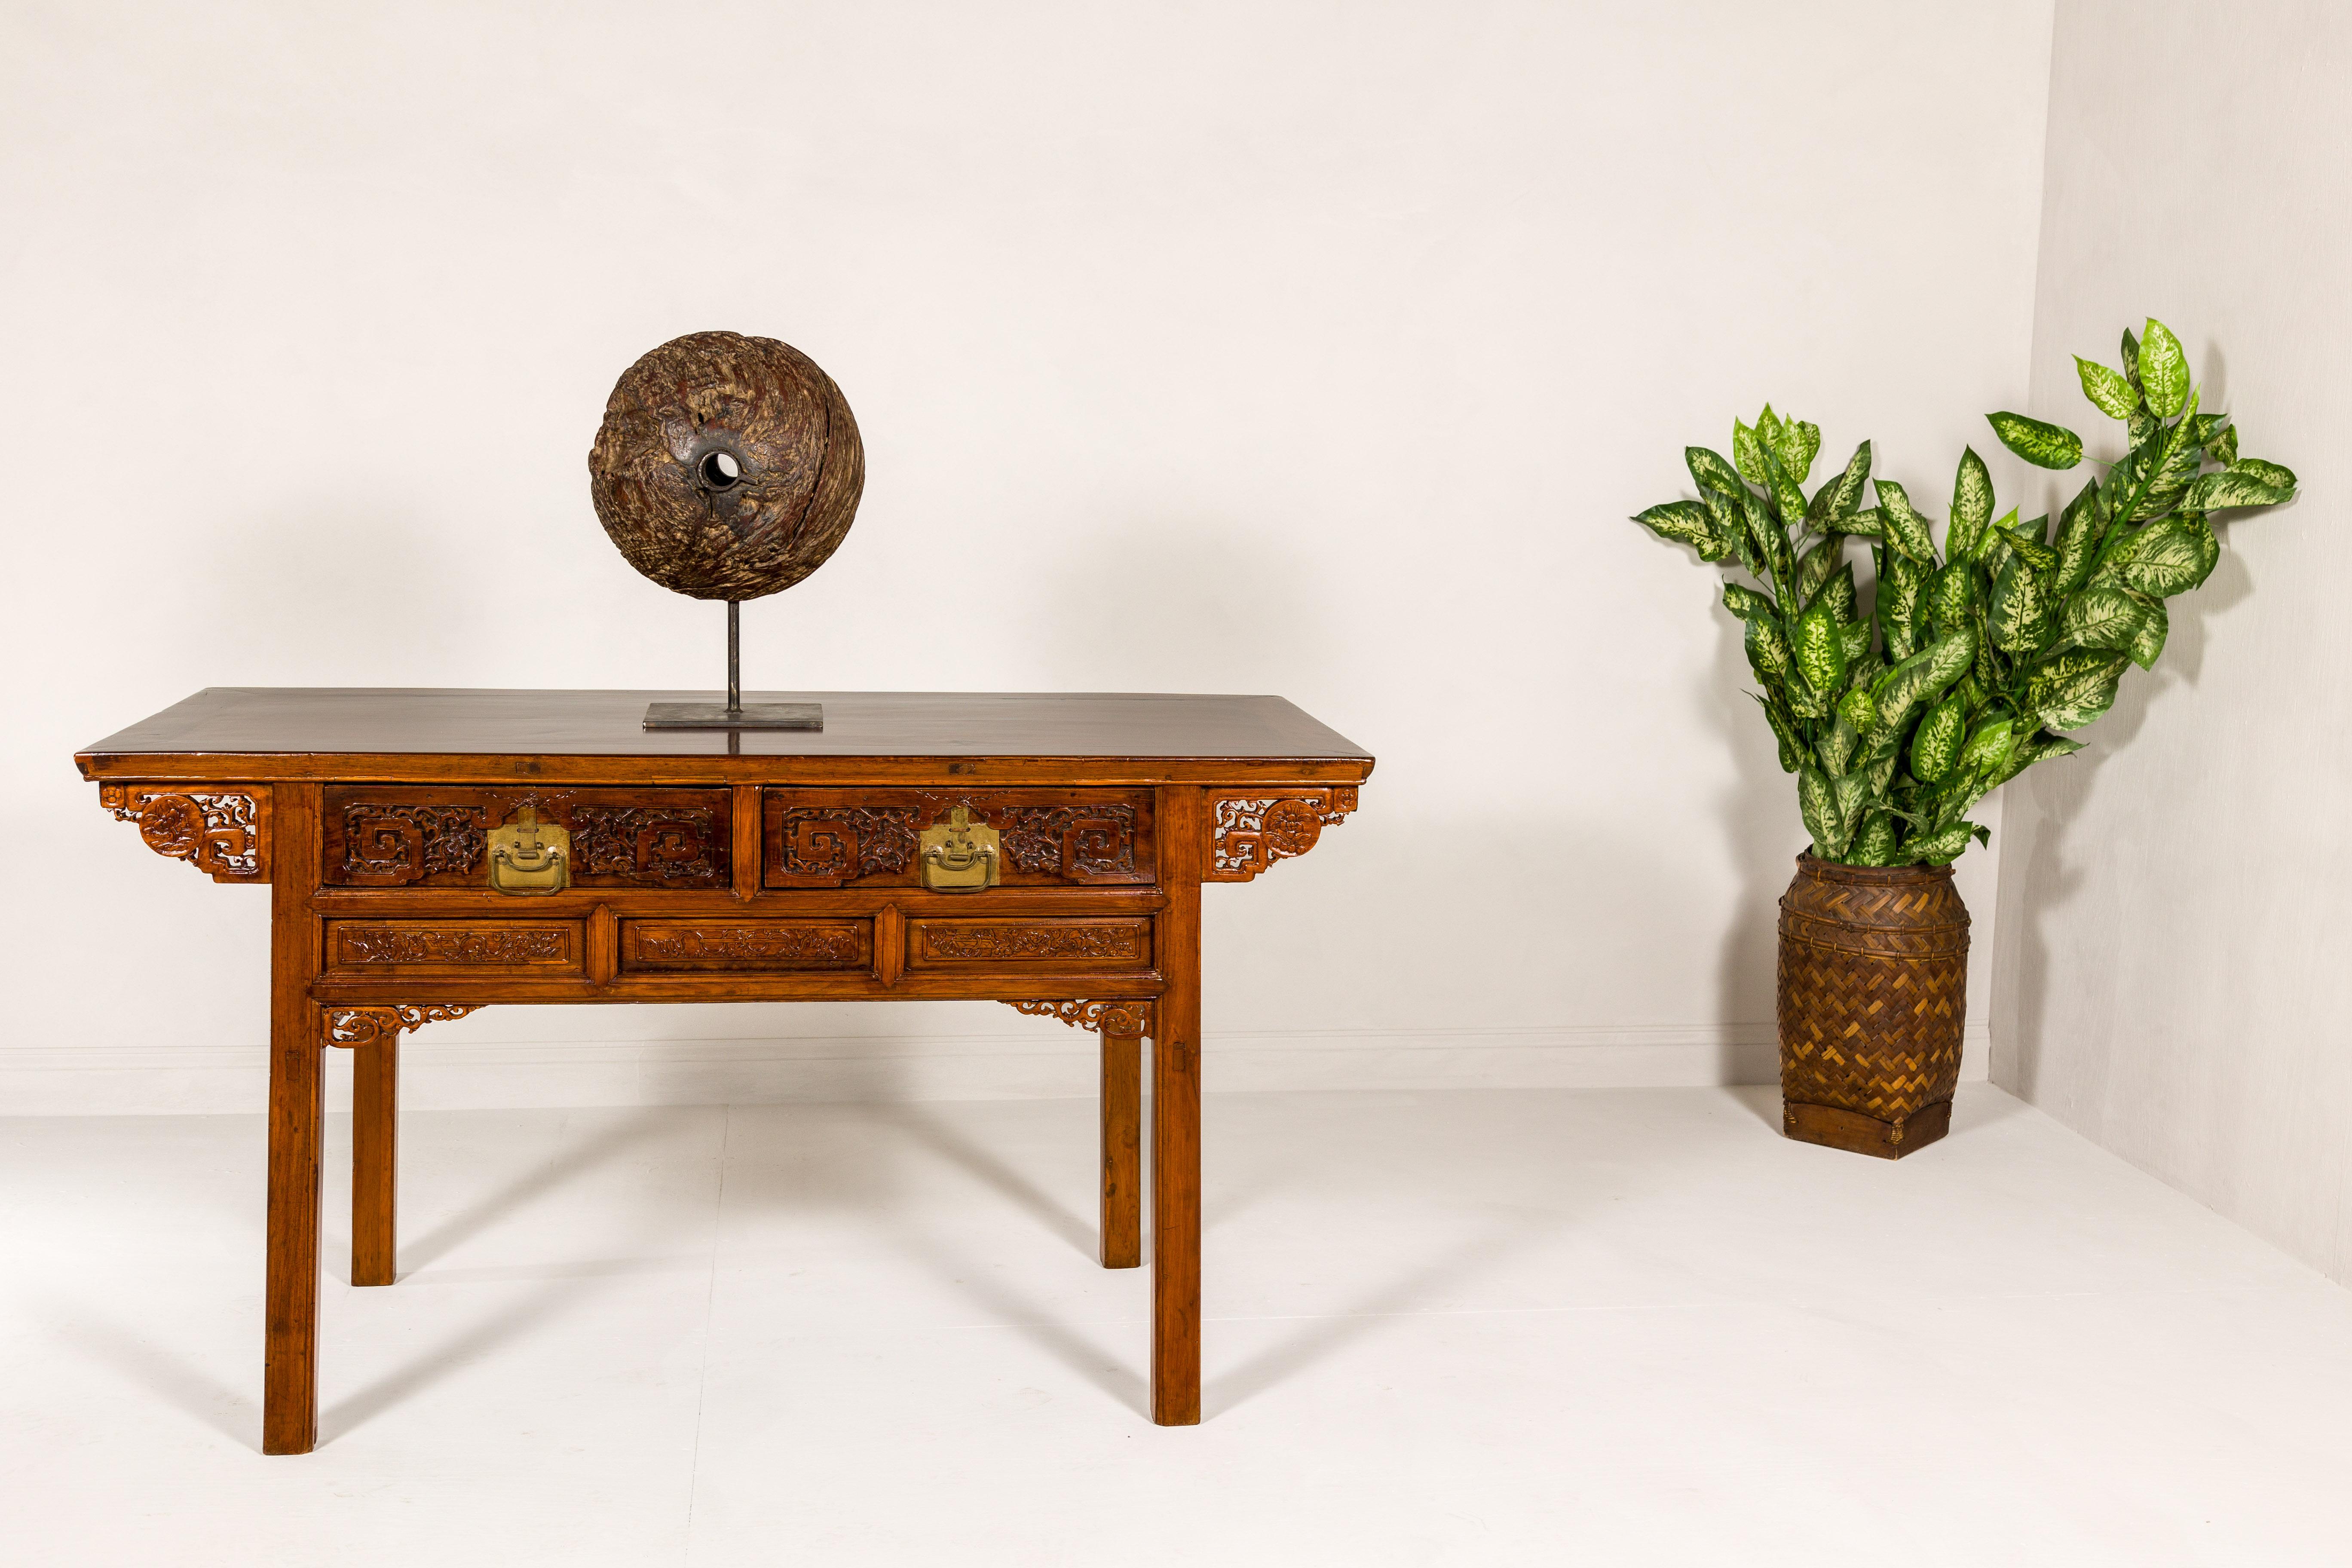 A richly carved console table with two drawers, scrolling clouds and flowers. An exquisitely detailed masterpiece, this vintage console table invites you into a world of ethereal beauty, richly carved with a tableau of scrolling clouds and blooming